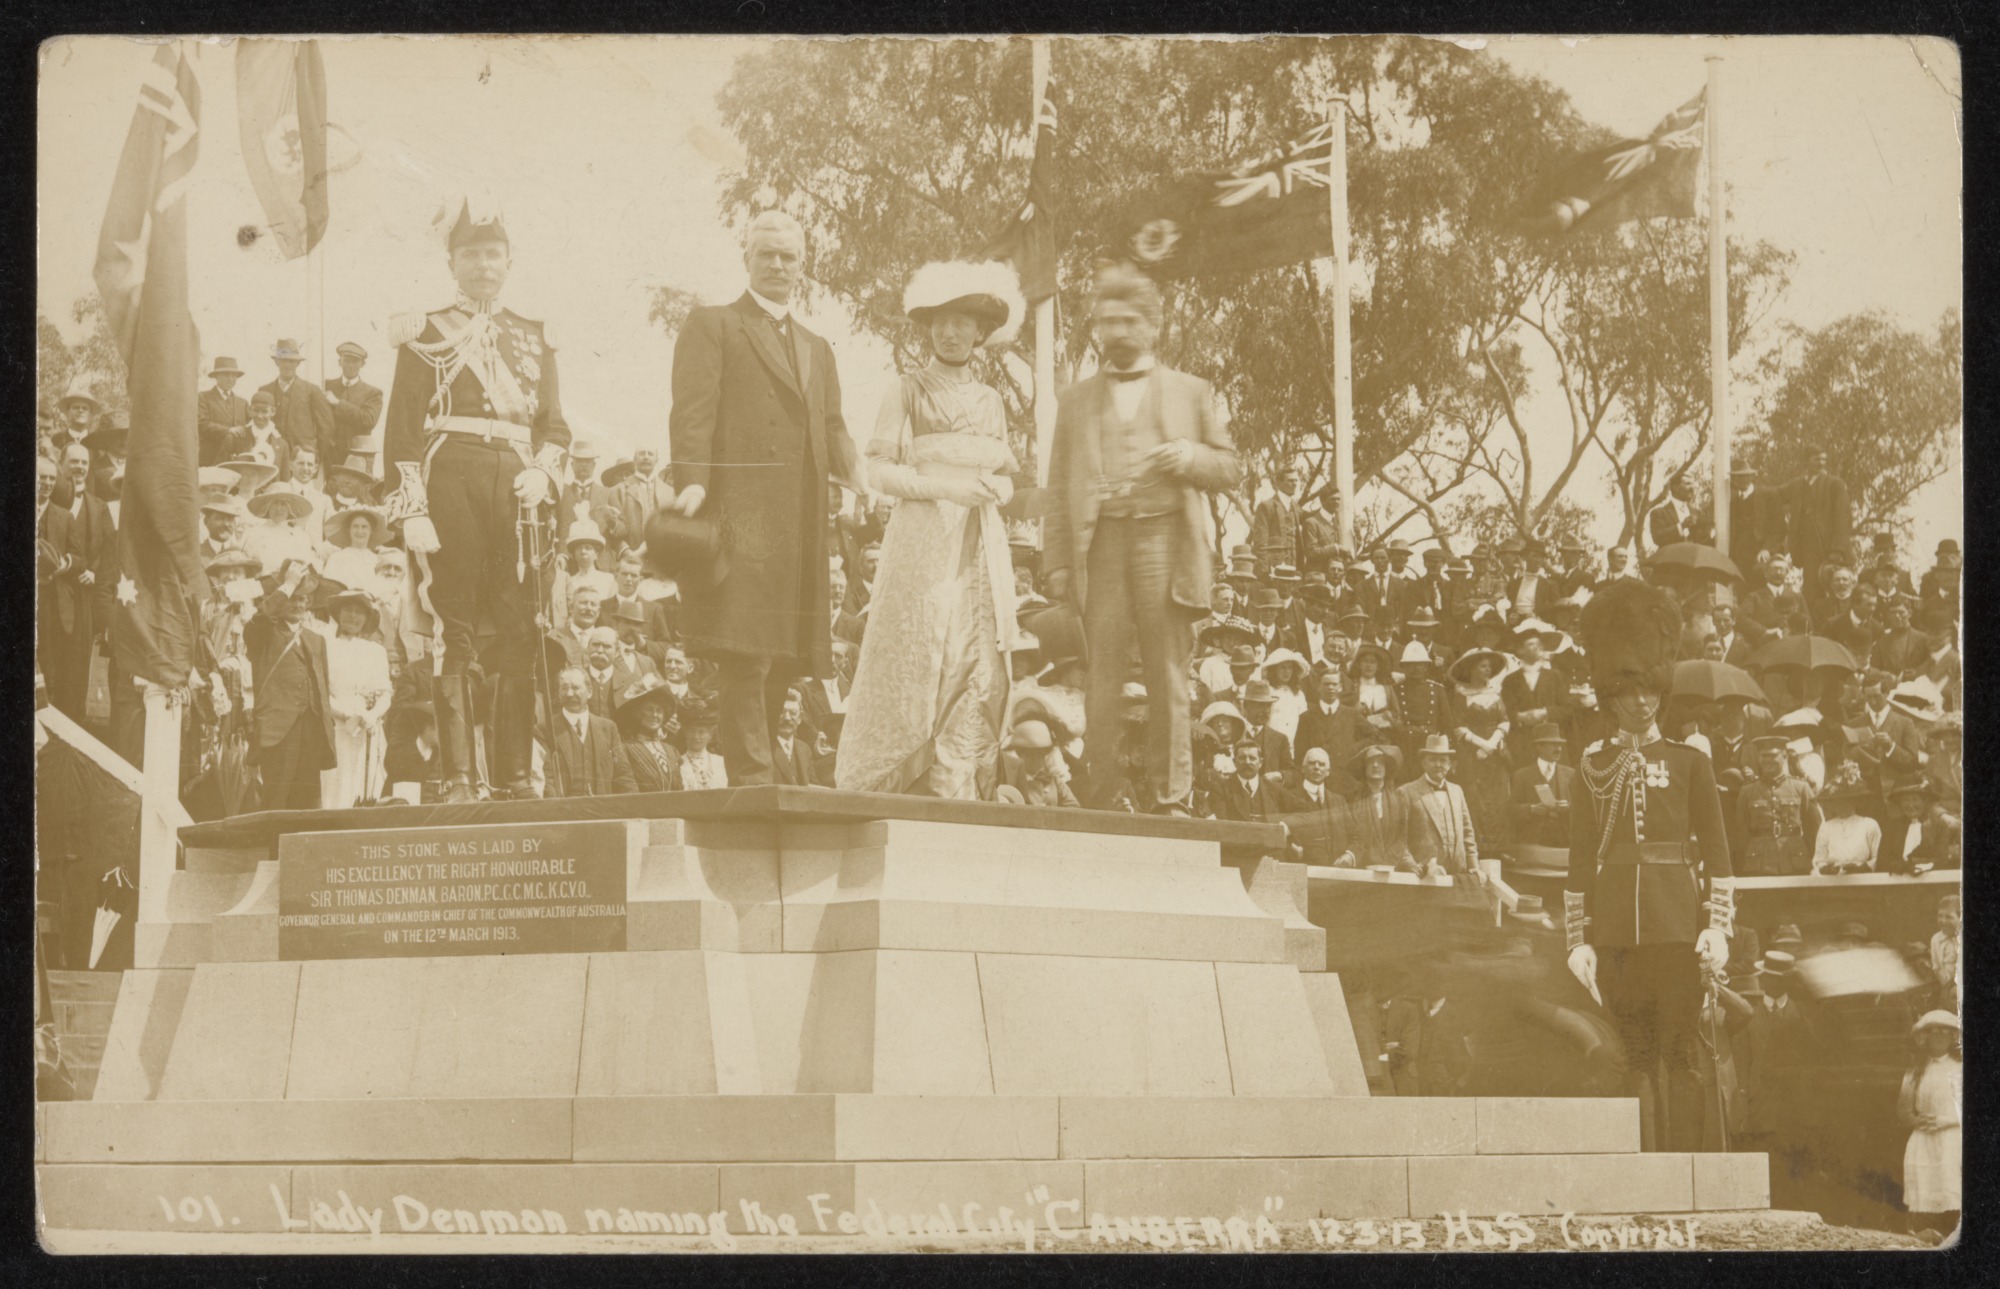  A ceremony to name Australia’s new capital ‘Canberra’, Kurrajong Hill (now known as Capital Hill), 12 March 1913.